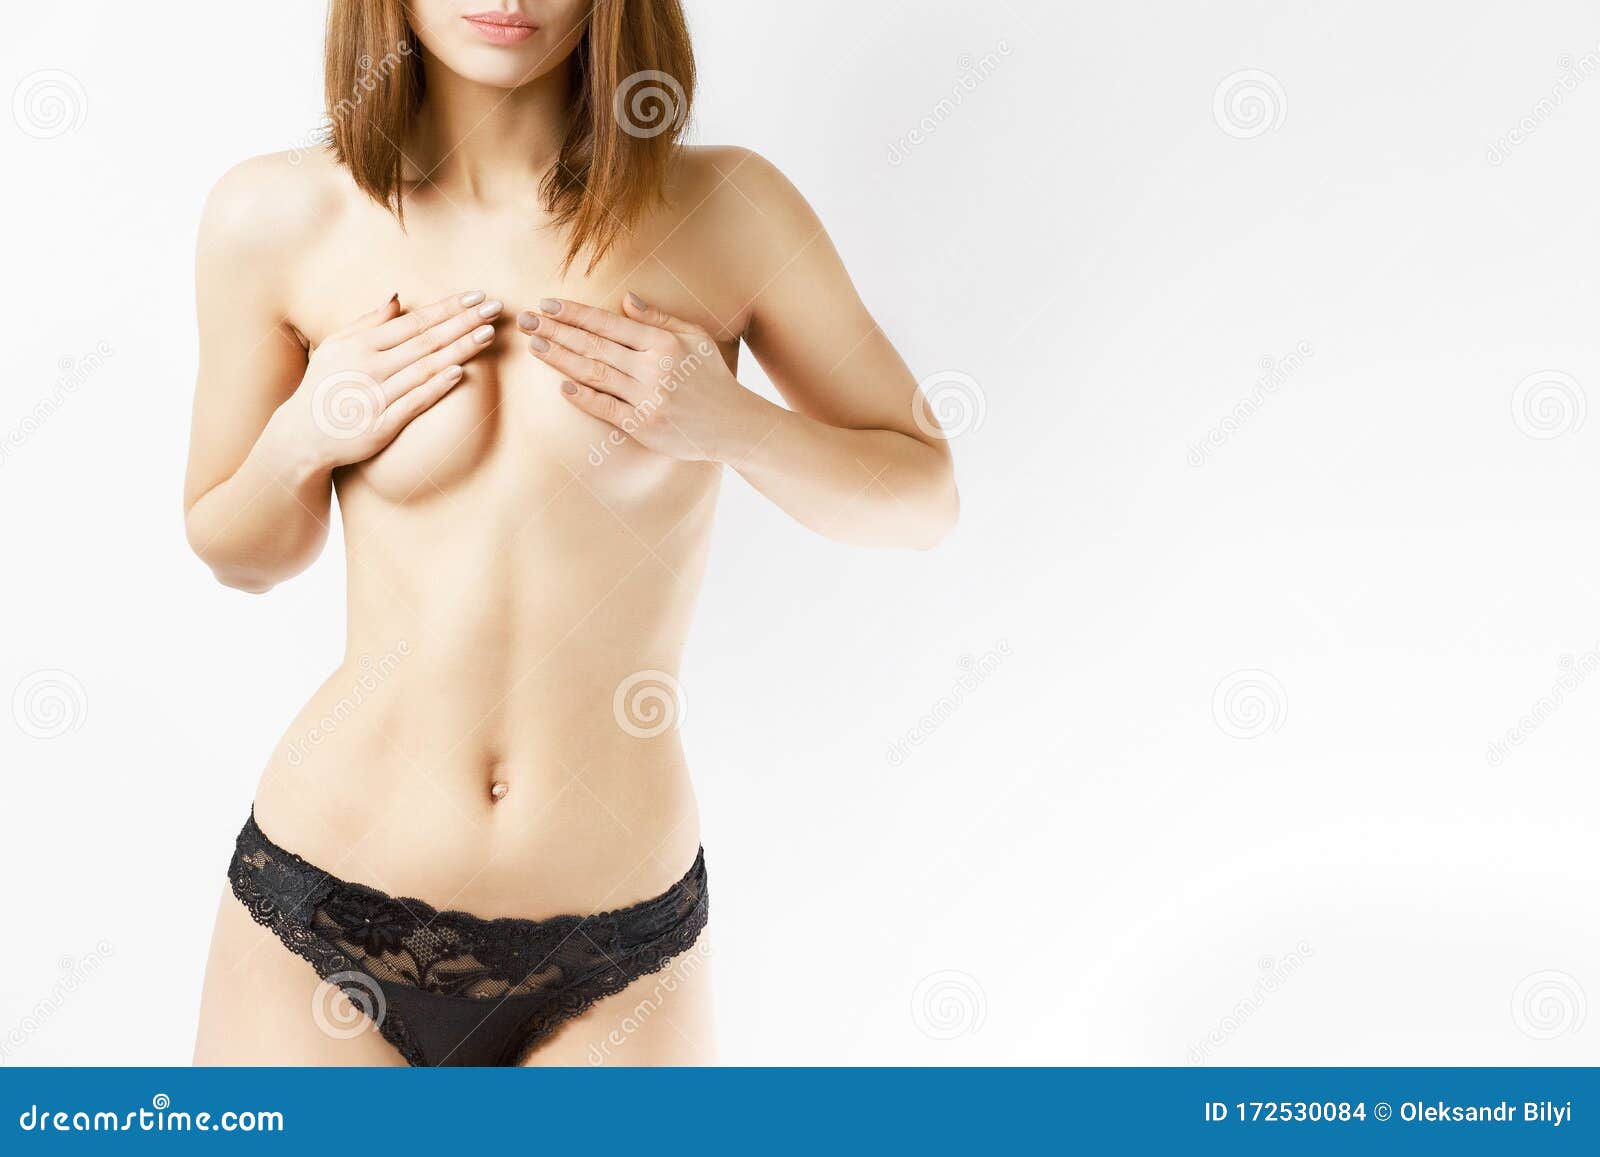 Girl Standing without Bra on White Background Stock Photo - Image